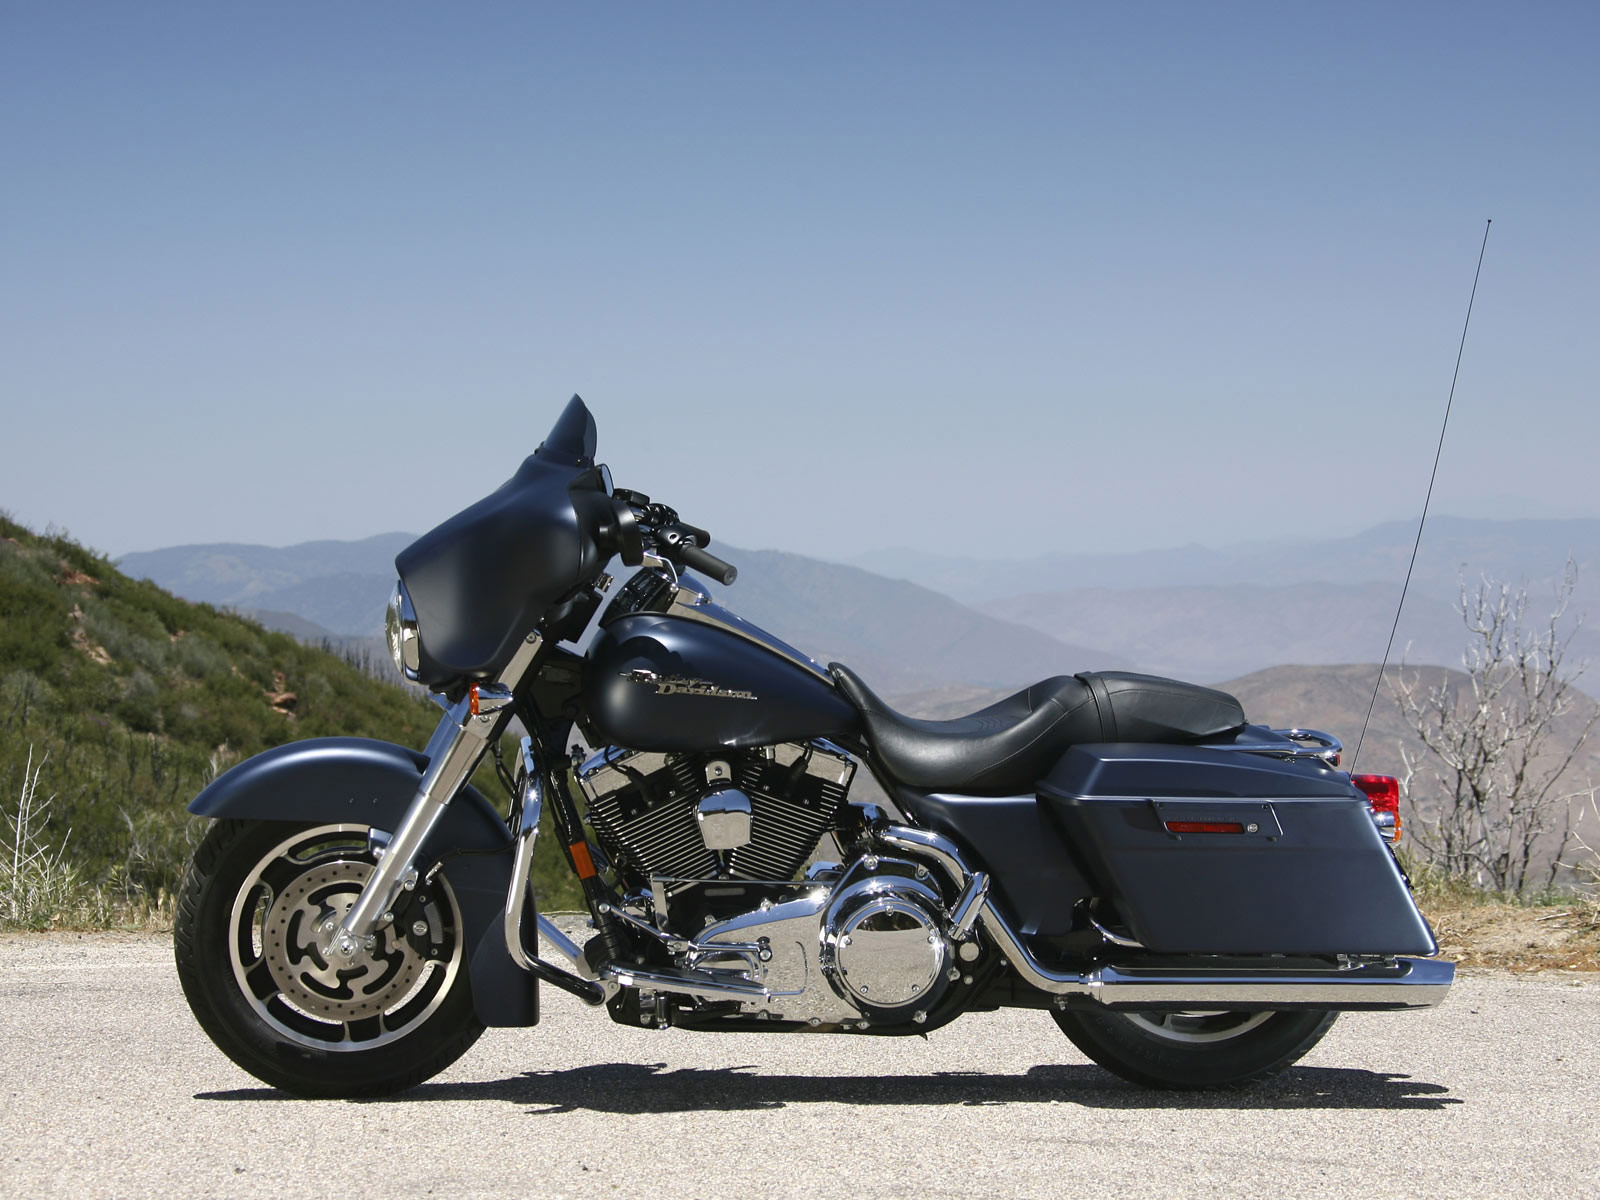 2008 Harley-Davidson FLHX Street Glide pictures, specifications